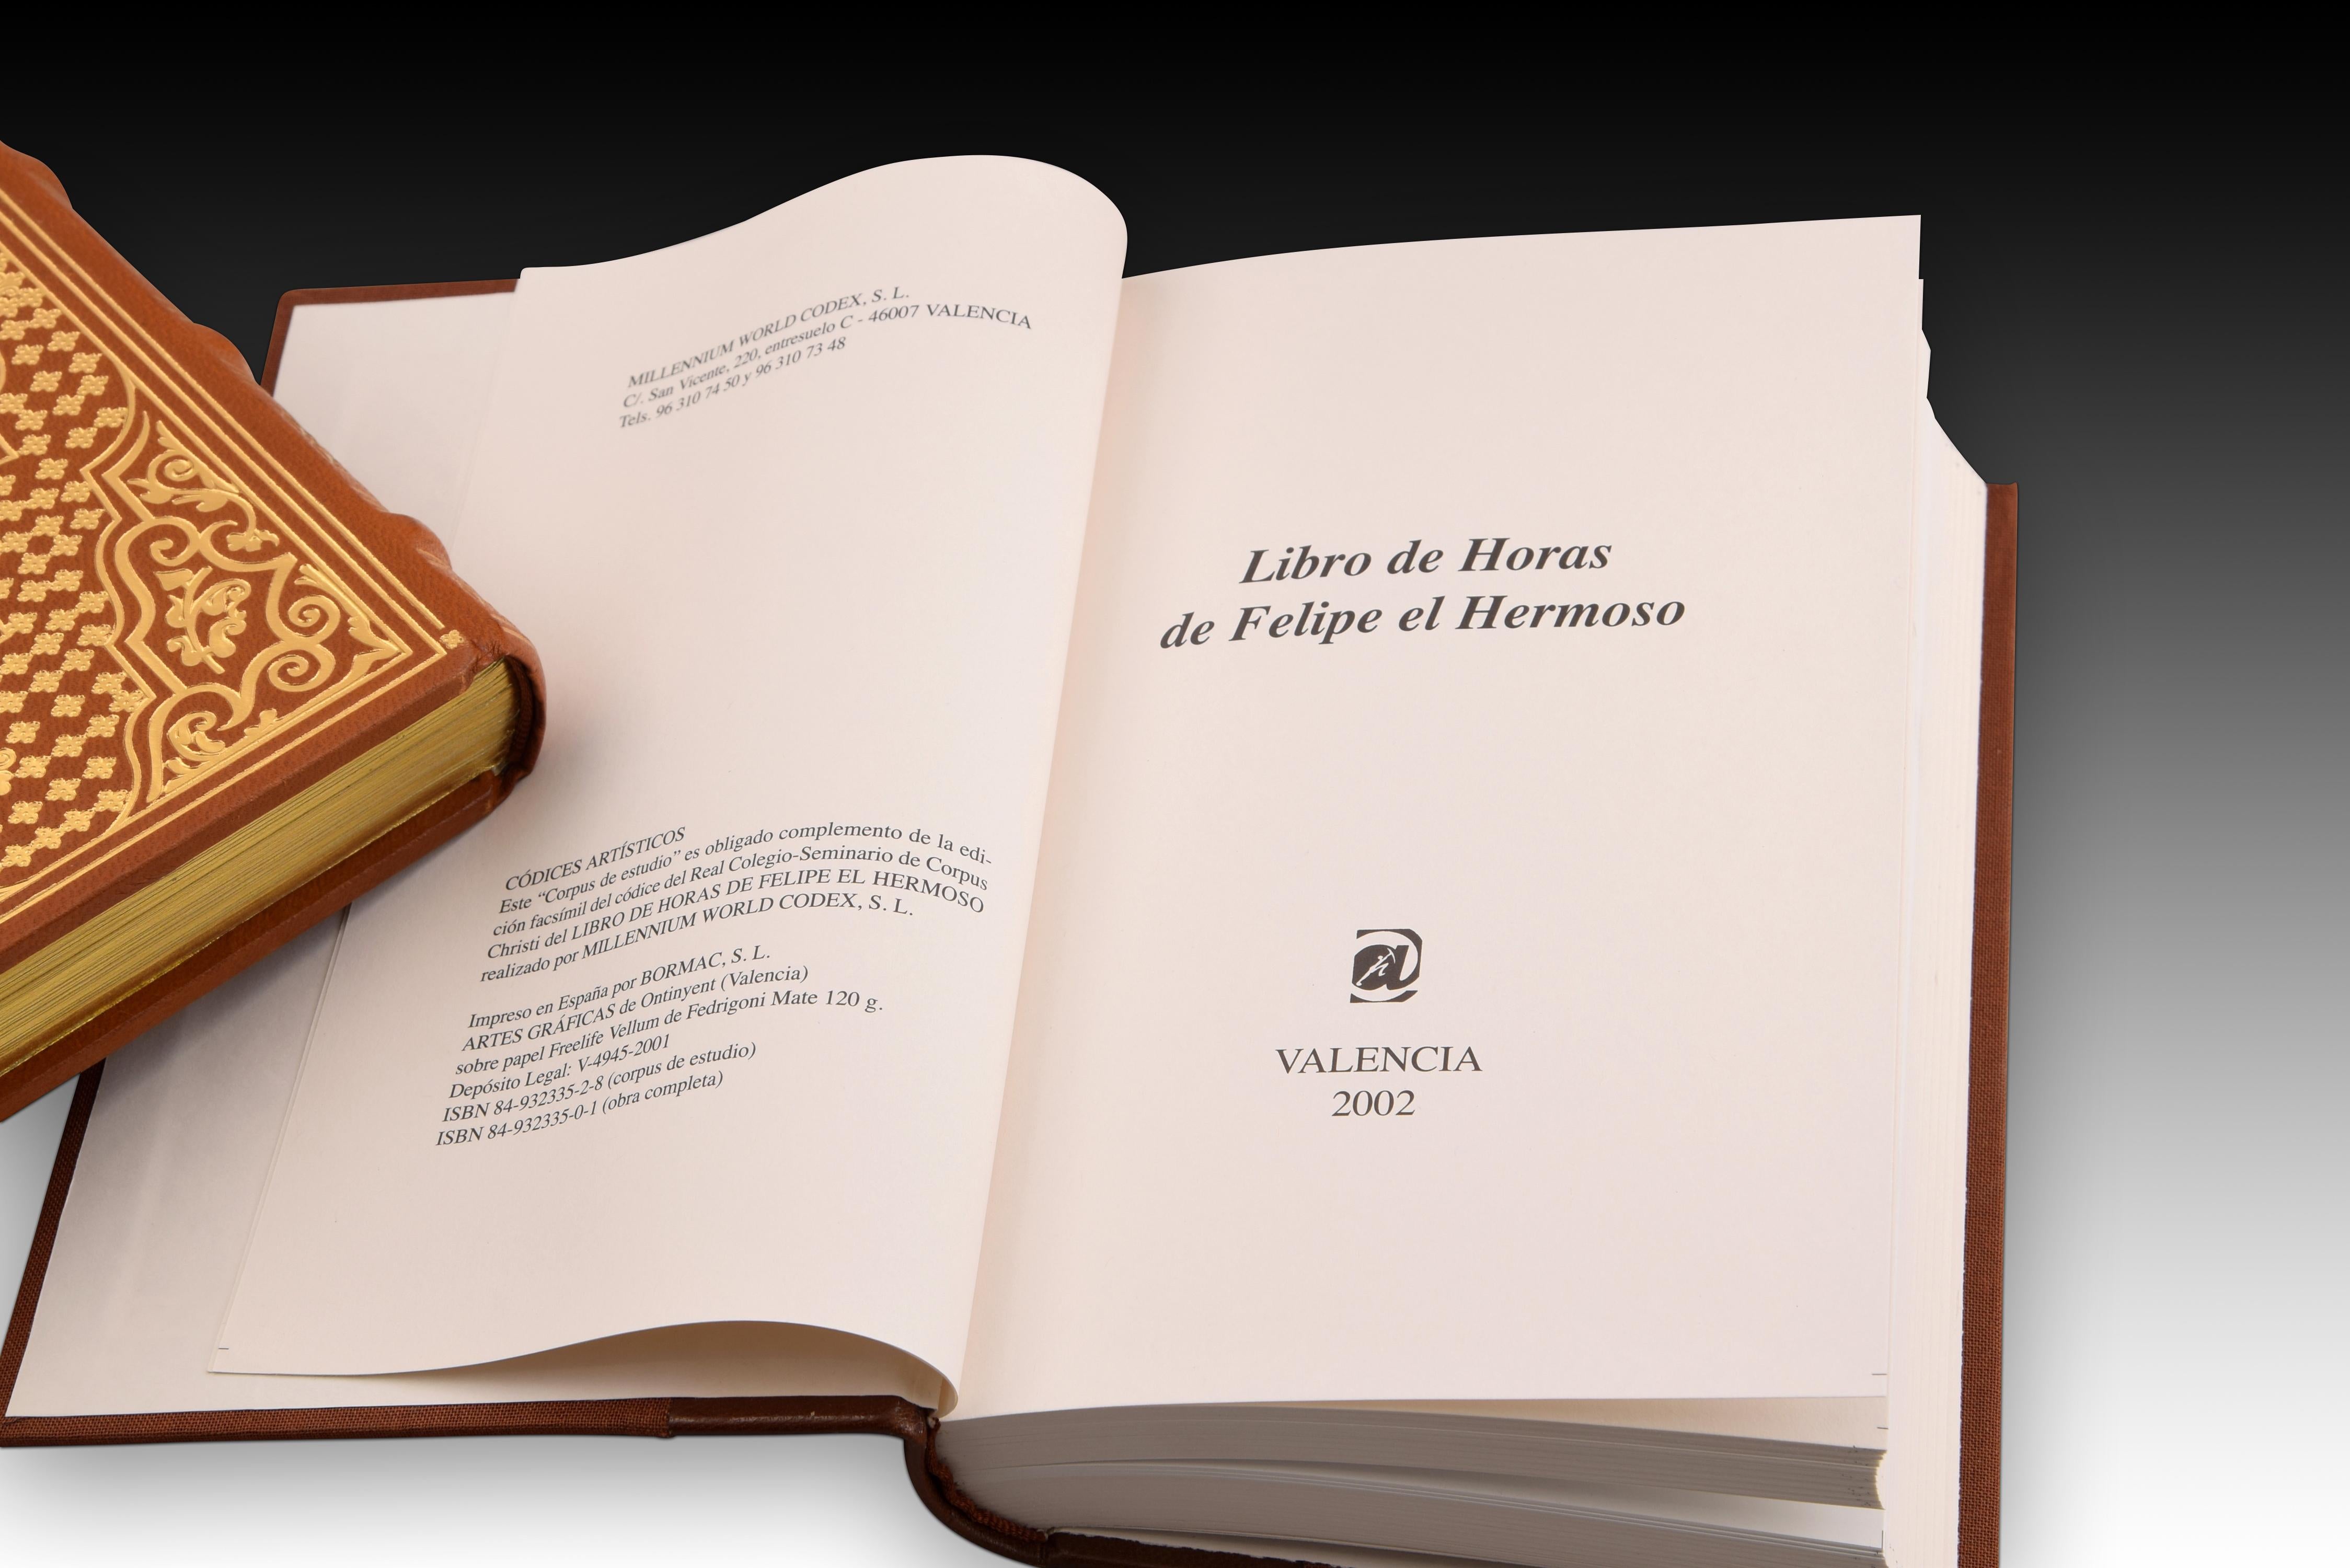 Other Book of Hours of Felipe El Hermoso, Facsimile with Study and Case, Spain, 2002